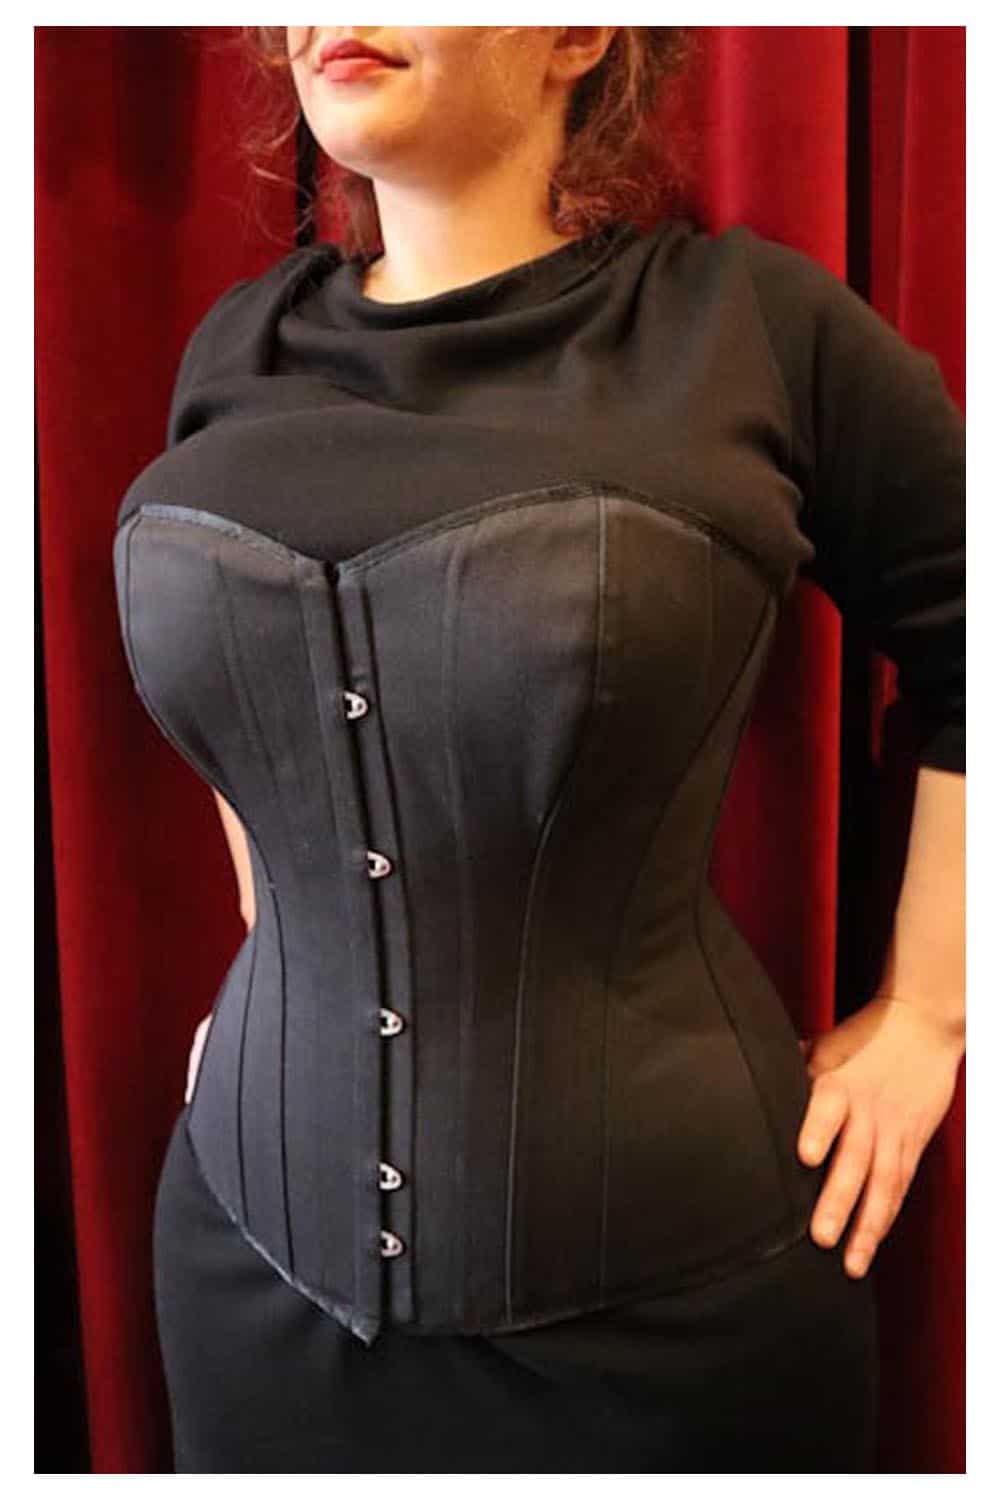 Fill Your Closet with Beautiful Black Waist Trainer Corset from us